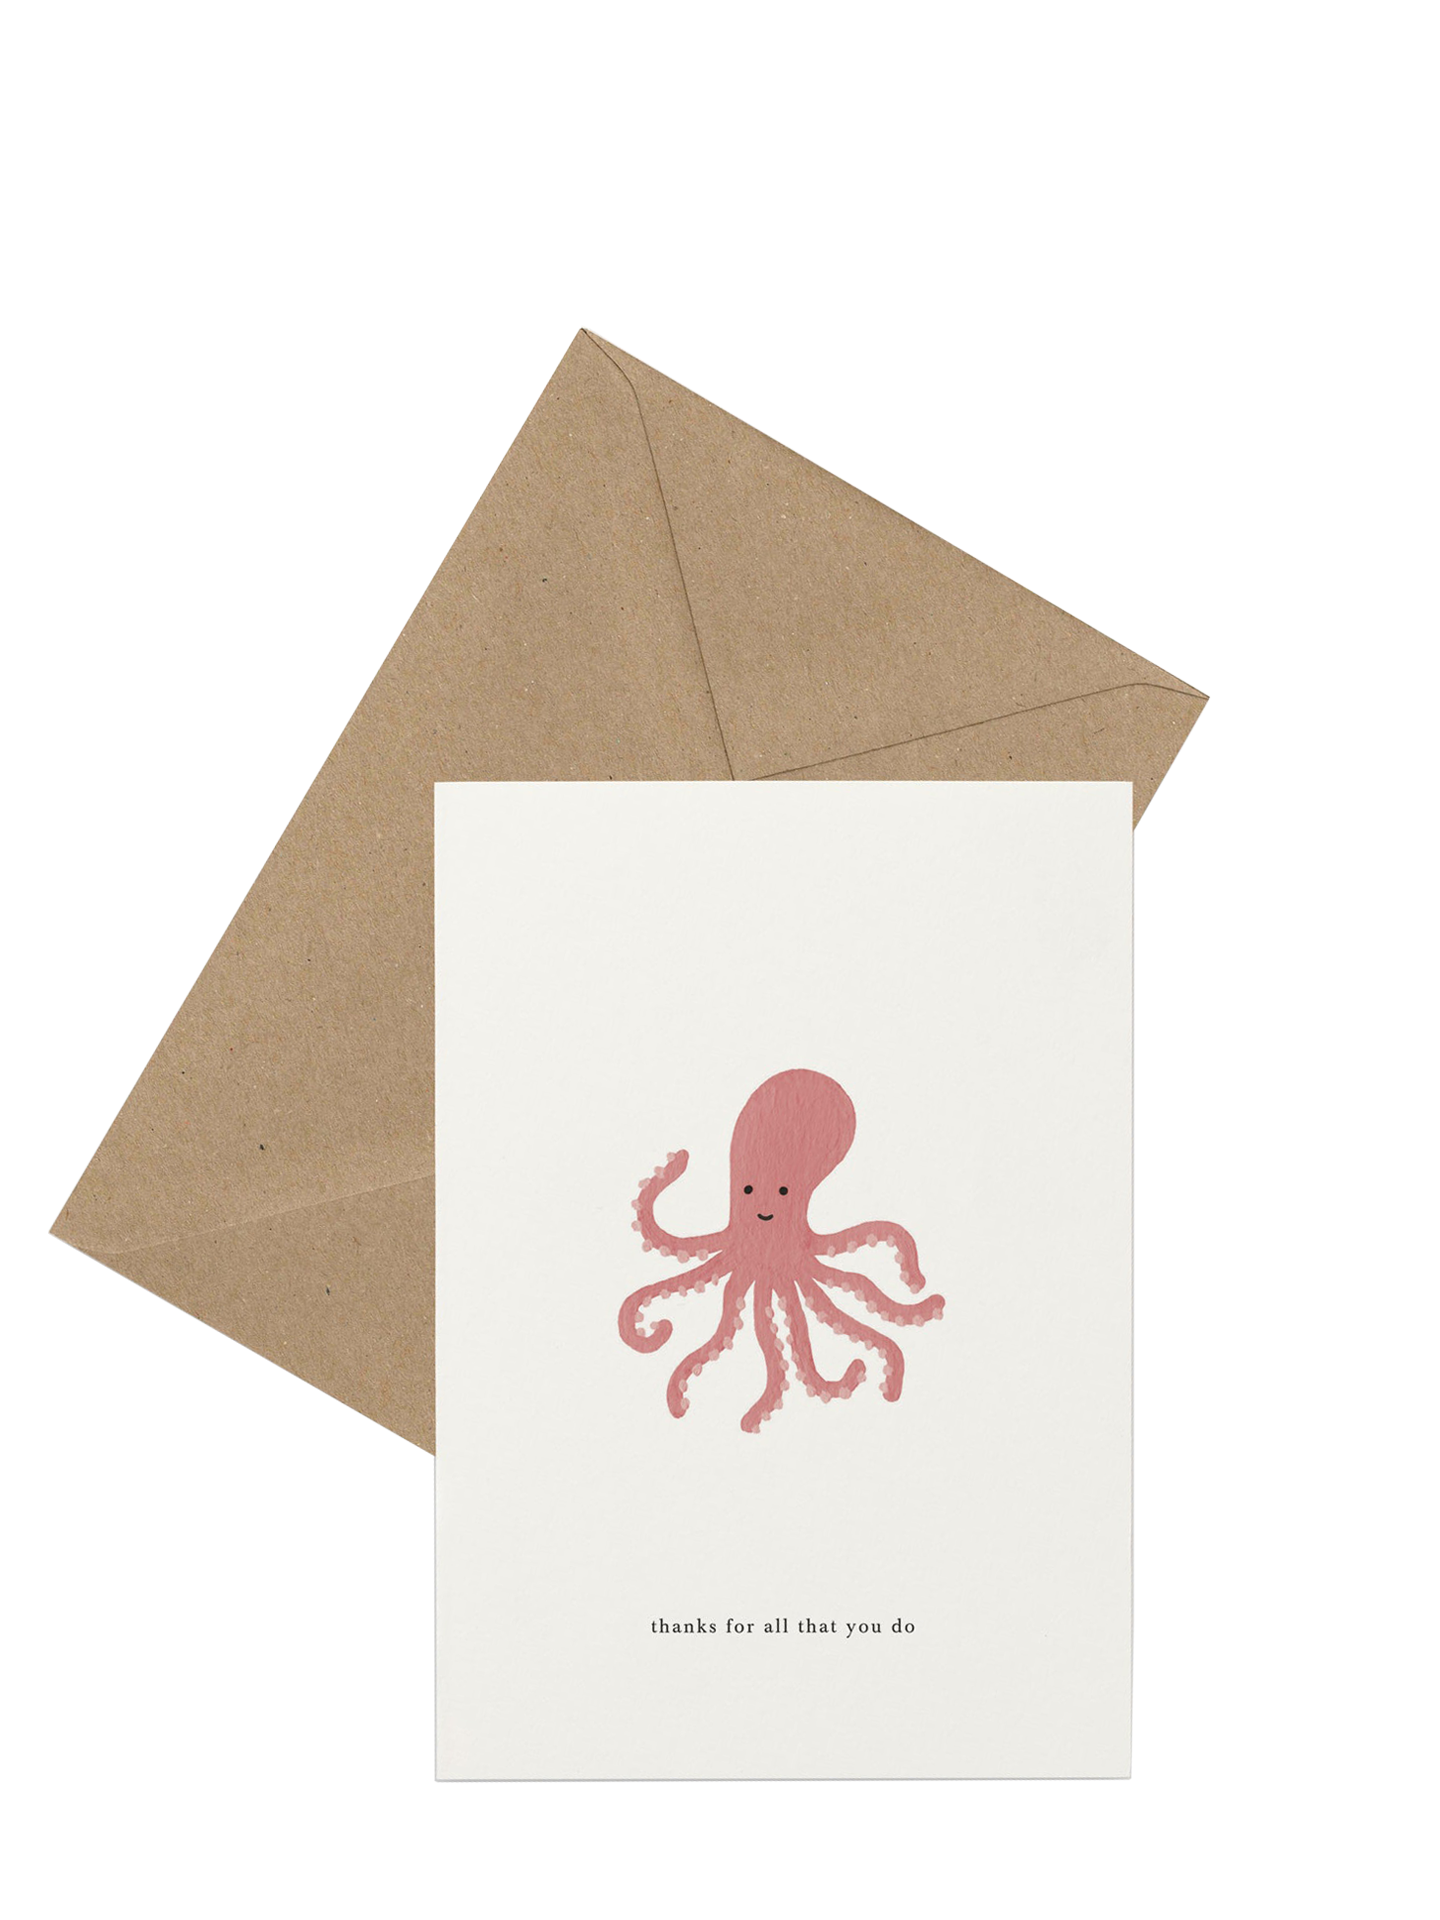 Octopus card (thanks for all that you do) Thank you card